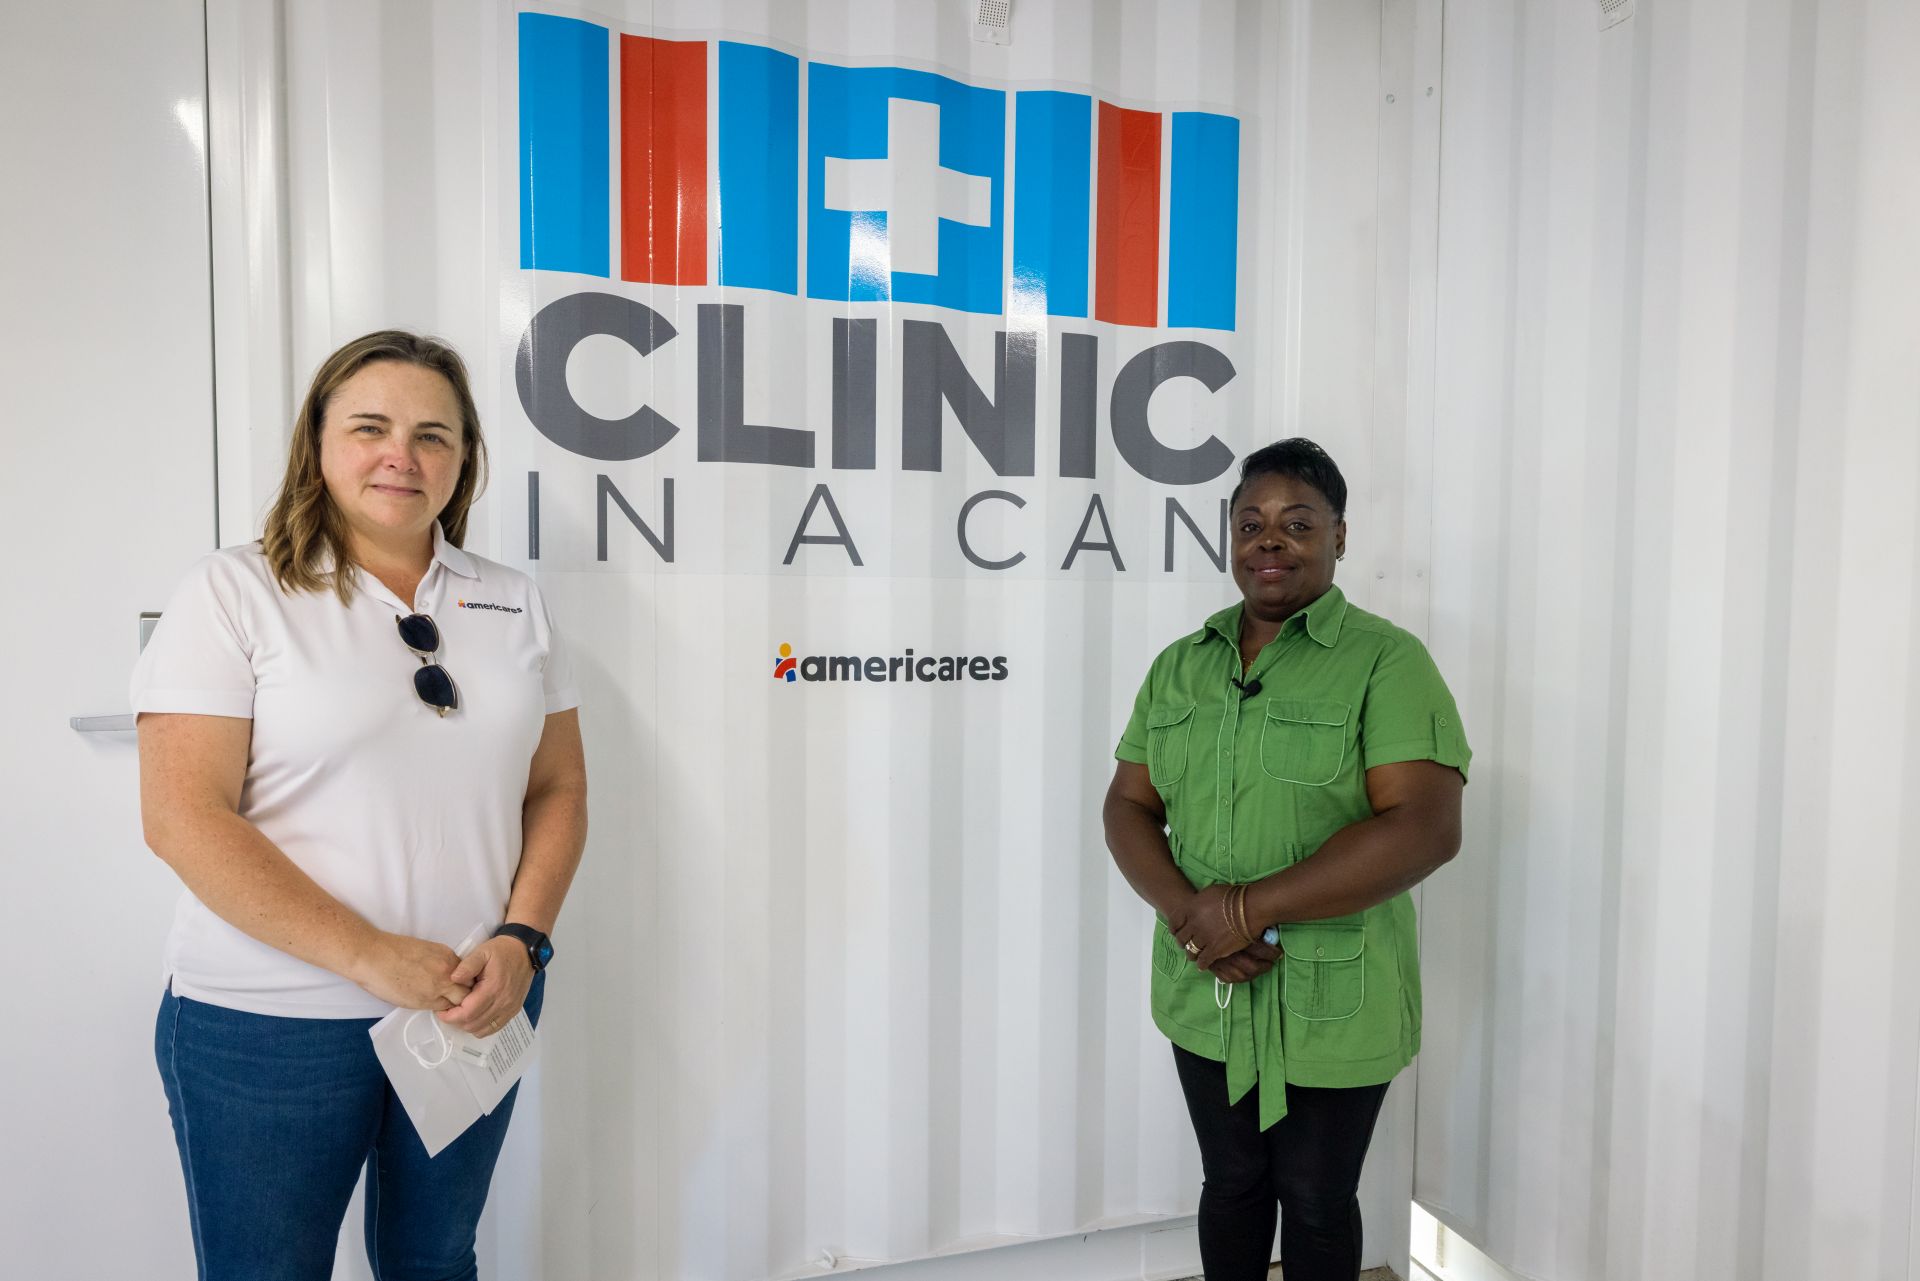 Two staff members stand outside the Clinic in a Can donated by Americares